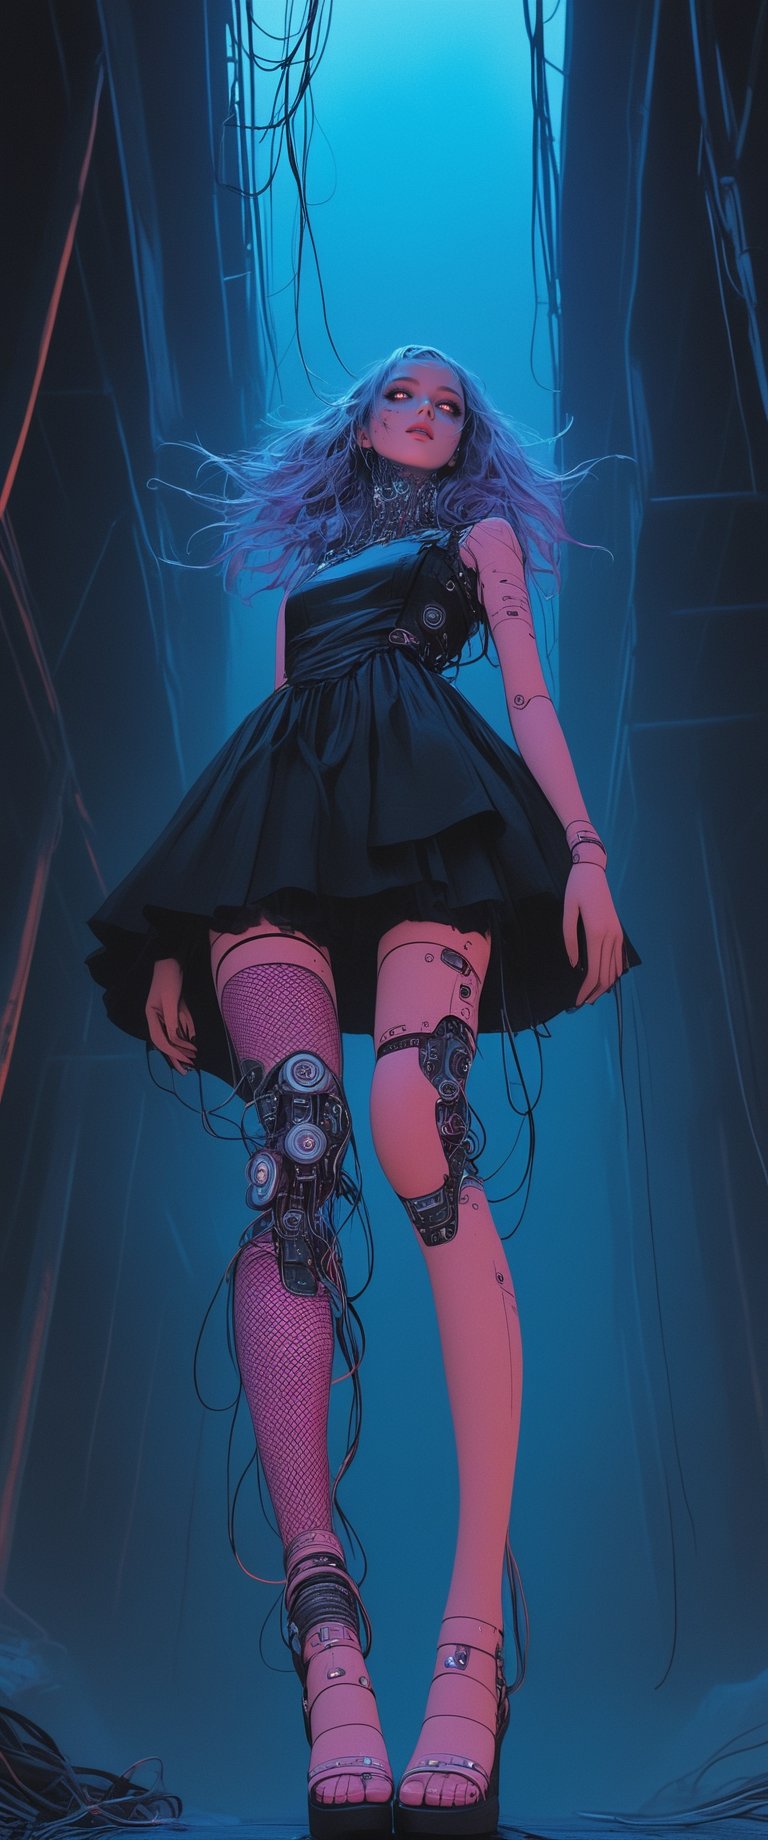 A cyborg girl sex doll hangs precariously from a rickety catwalk inside a decaying warehouse, her metallic limbs splayed out like a macabre sculpture. The air is thick with dust and the faint hum of machinery whirs in the darkness. Her synthetic skin glows with an eerie luminescence, as if charged by the city's raw energy. In this dystopian landscape, the only sound is the creaking of twisted metal and the distant thrum of neon-lit advertisements piercing the bleakness.,l4rg33y3s